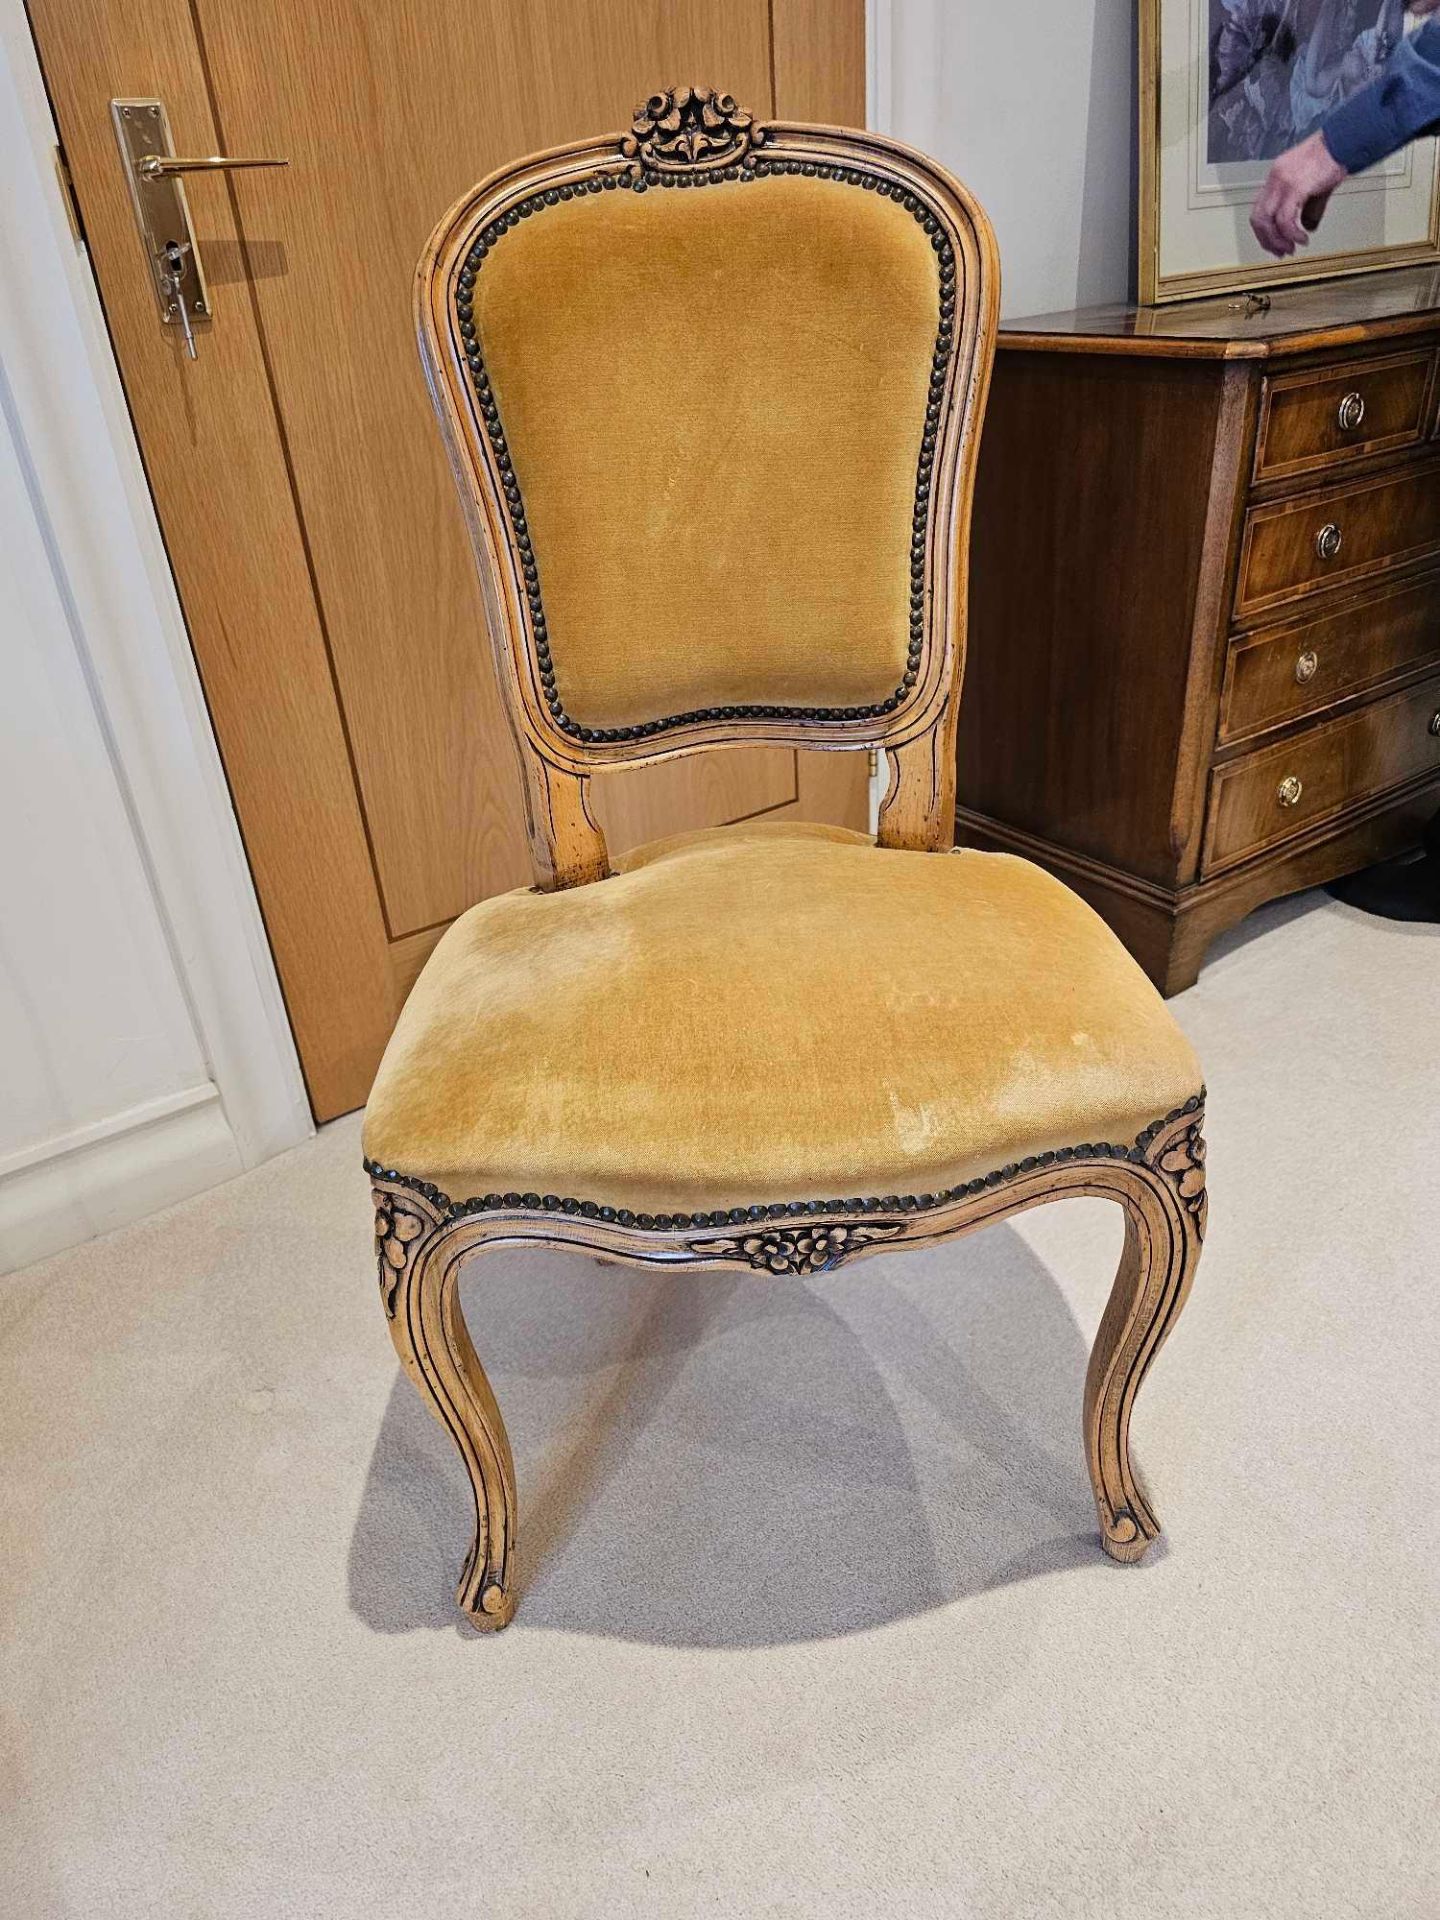 French Beechwood Side Chair, Louis XV Style, The Shaped Rectangular Back With Floral Cresting,